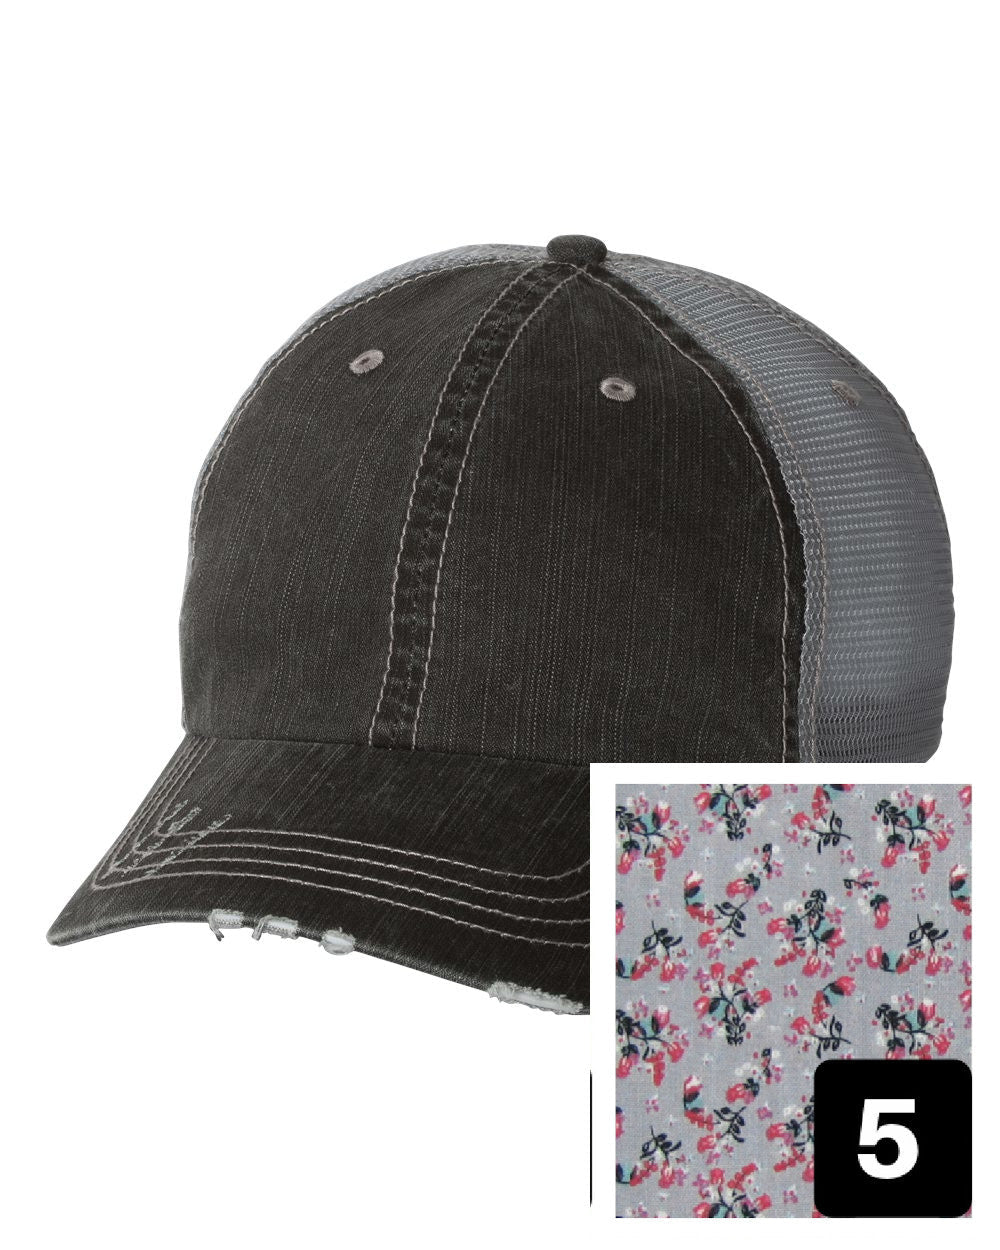 gray distressed trucker hat with purple and pink floral fabric state of Nevada